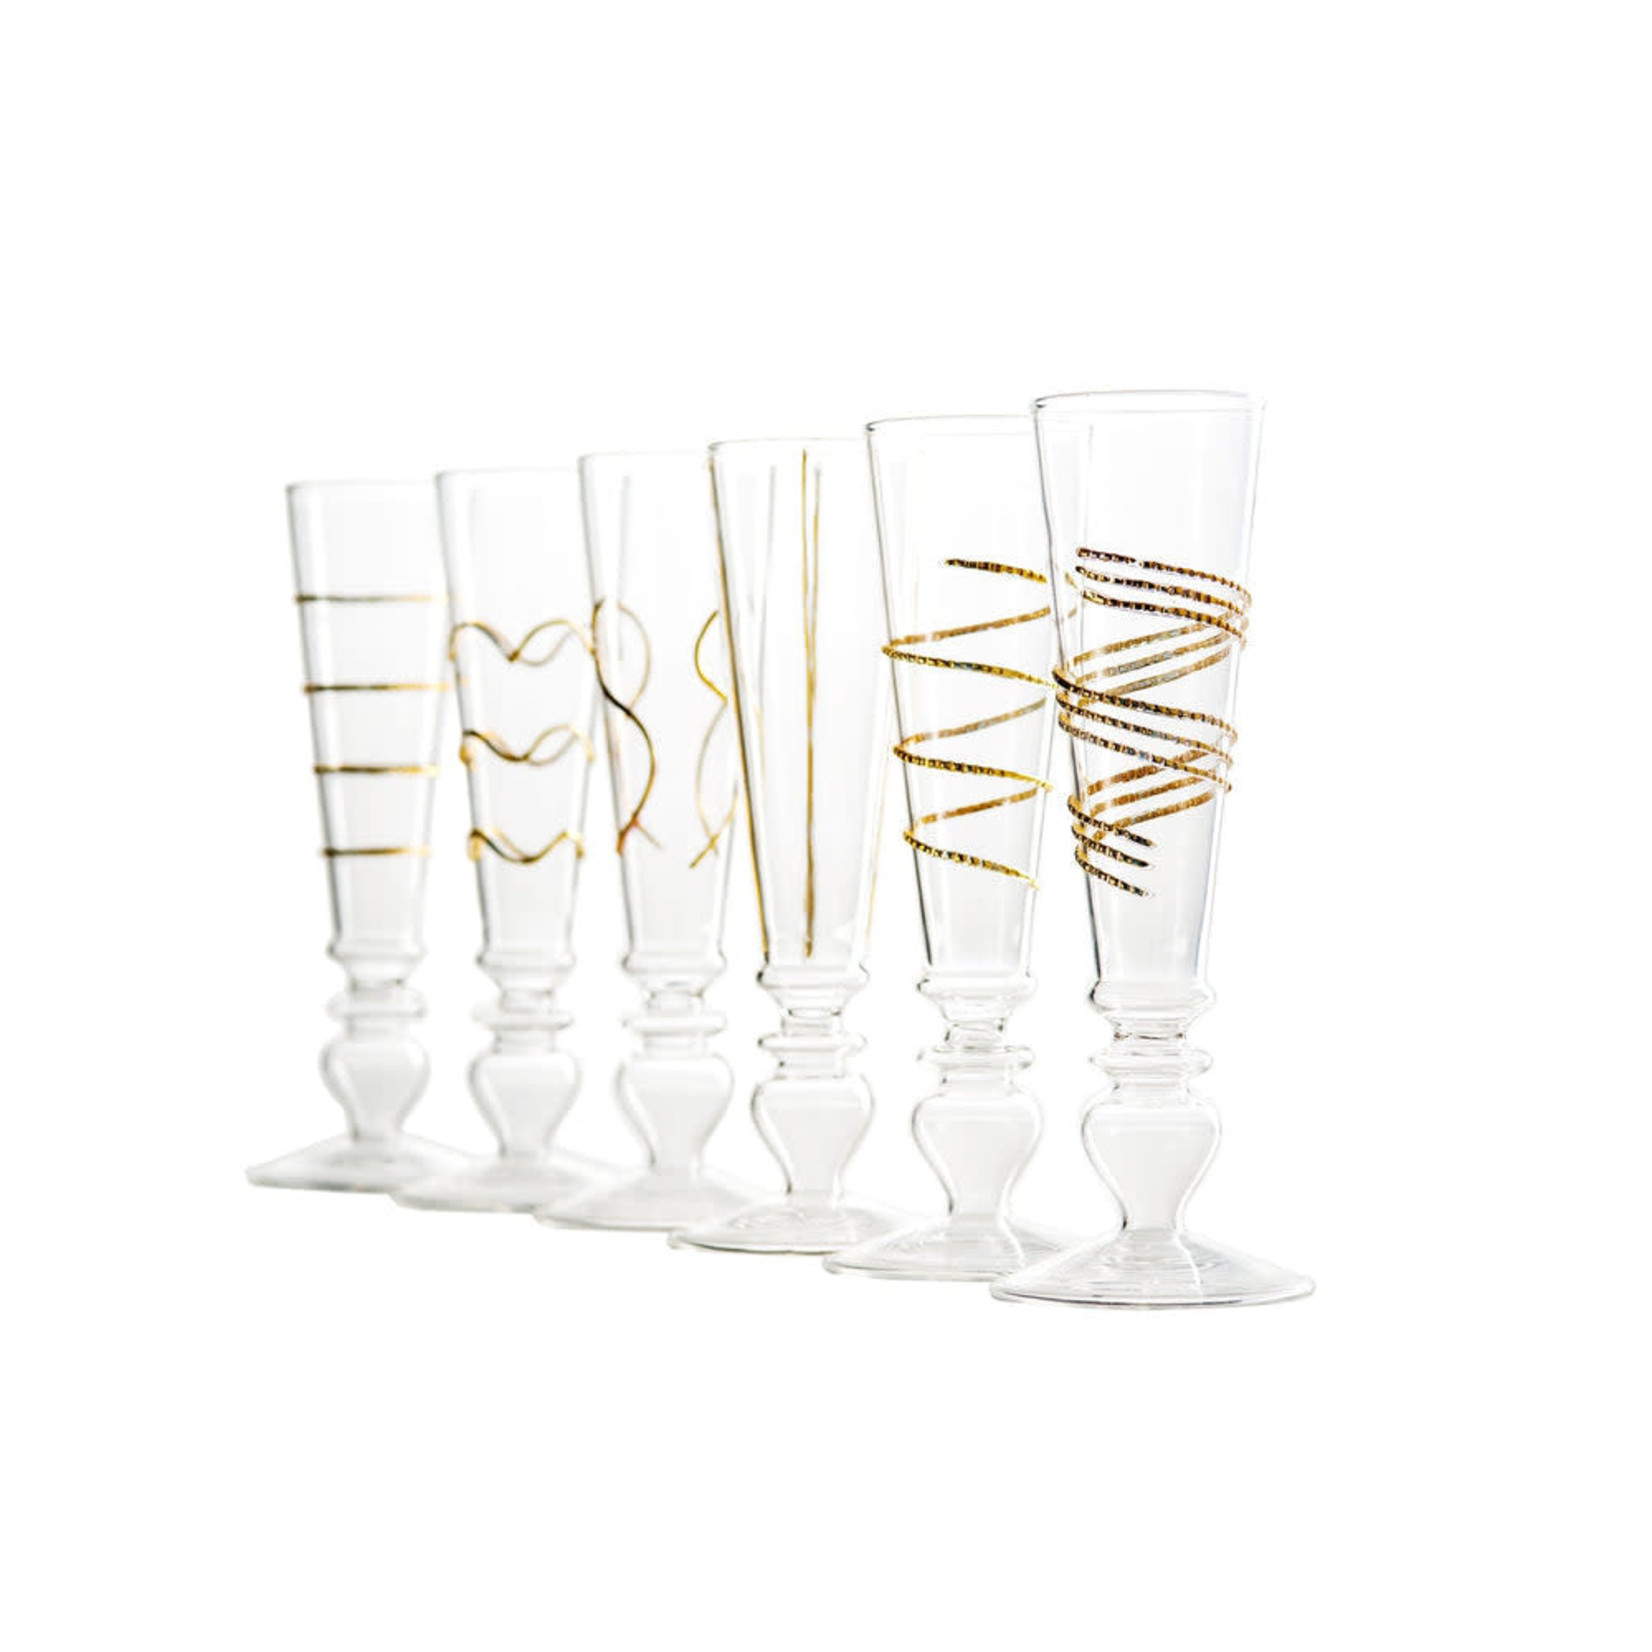 Footed Razzle Dazzle Gold Champagne, Set of 6